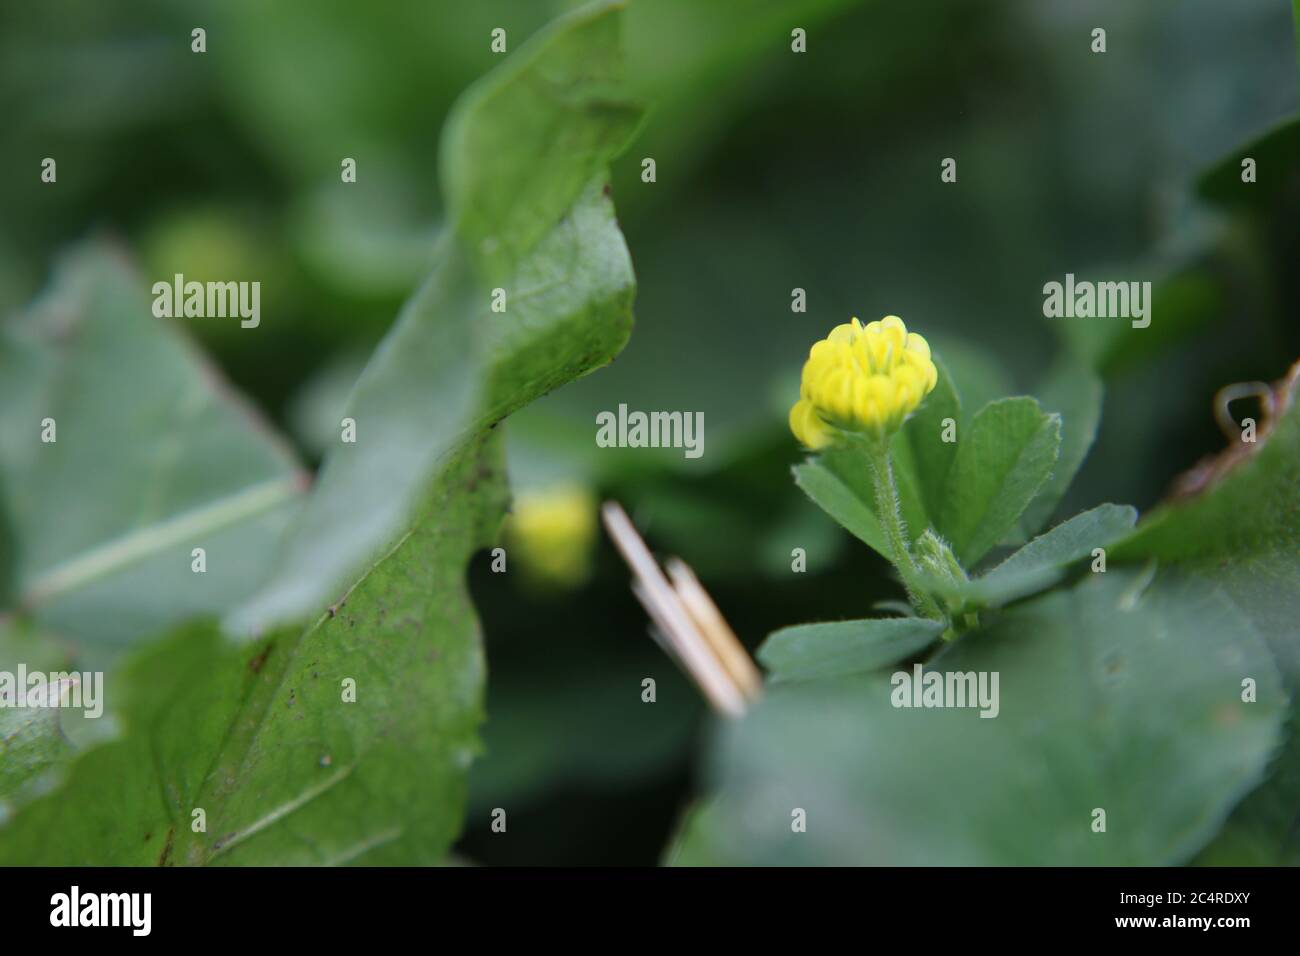 Beautiful yellow flower, Black Medick, Hop Clover, Yellow Trefoil, Medicago lupulina, found growing naturally in the backyard. in the US. Stock Photo